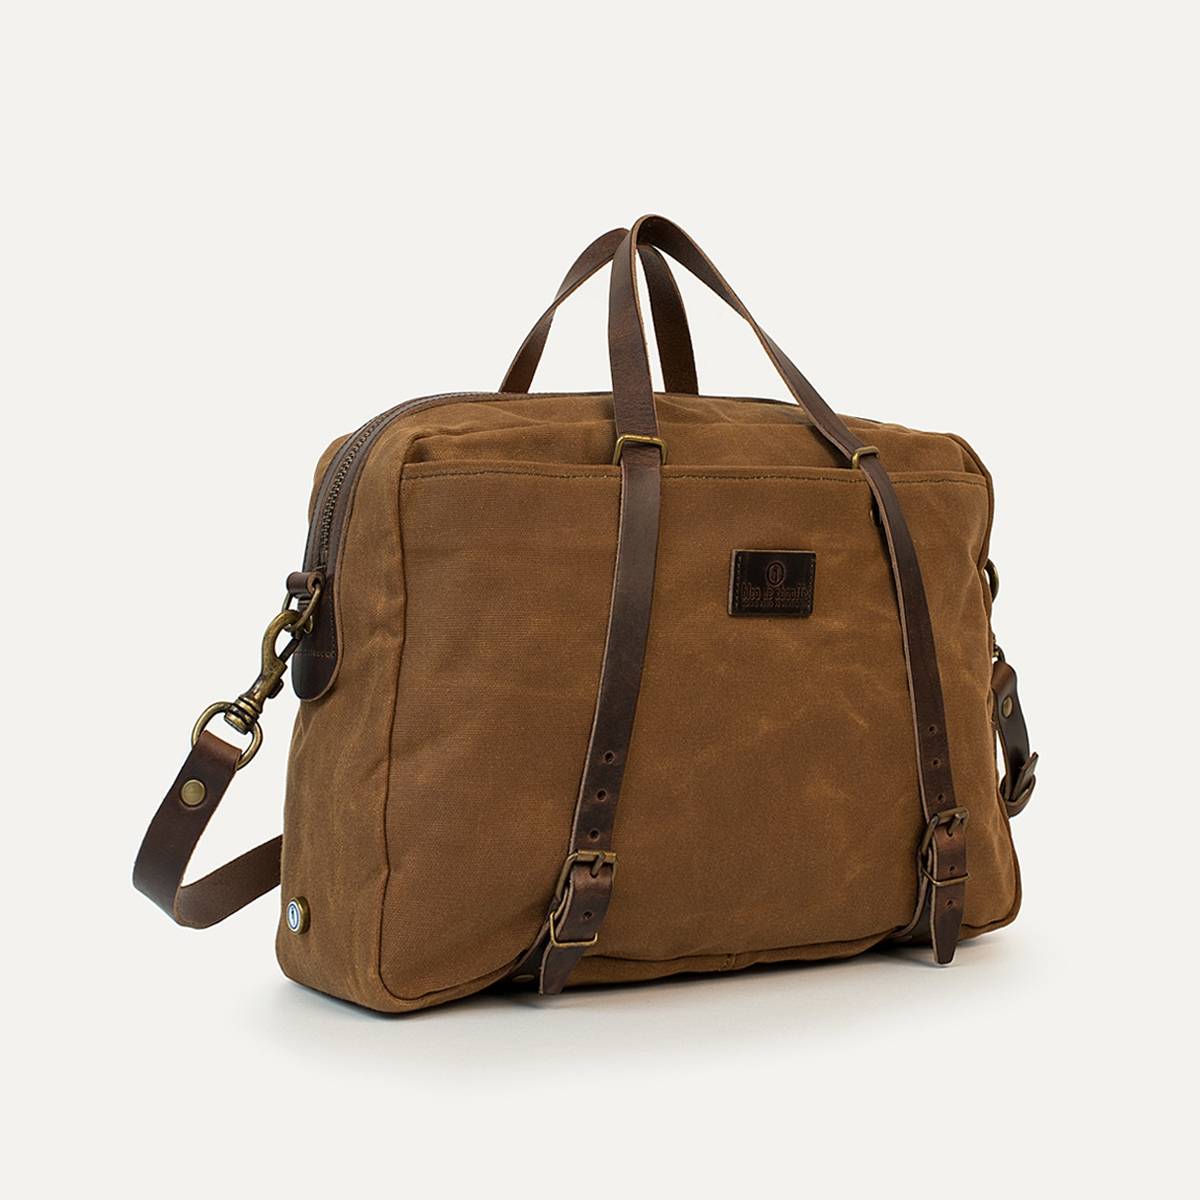 Business bag Report WAXY - Camel (image n°1)